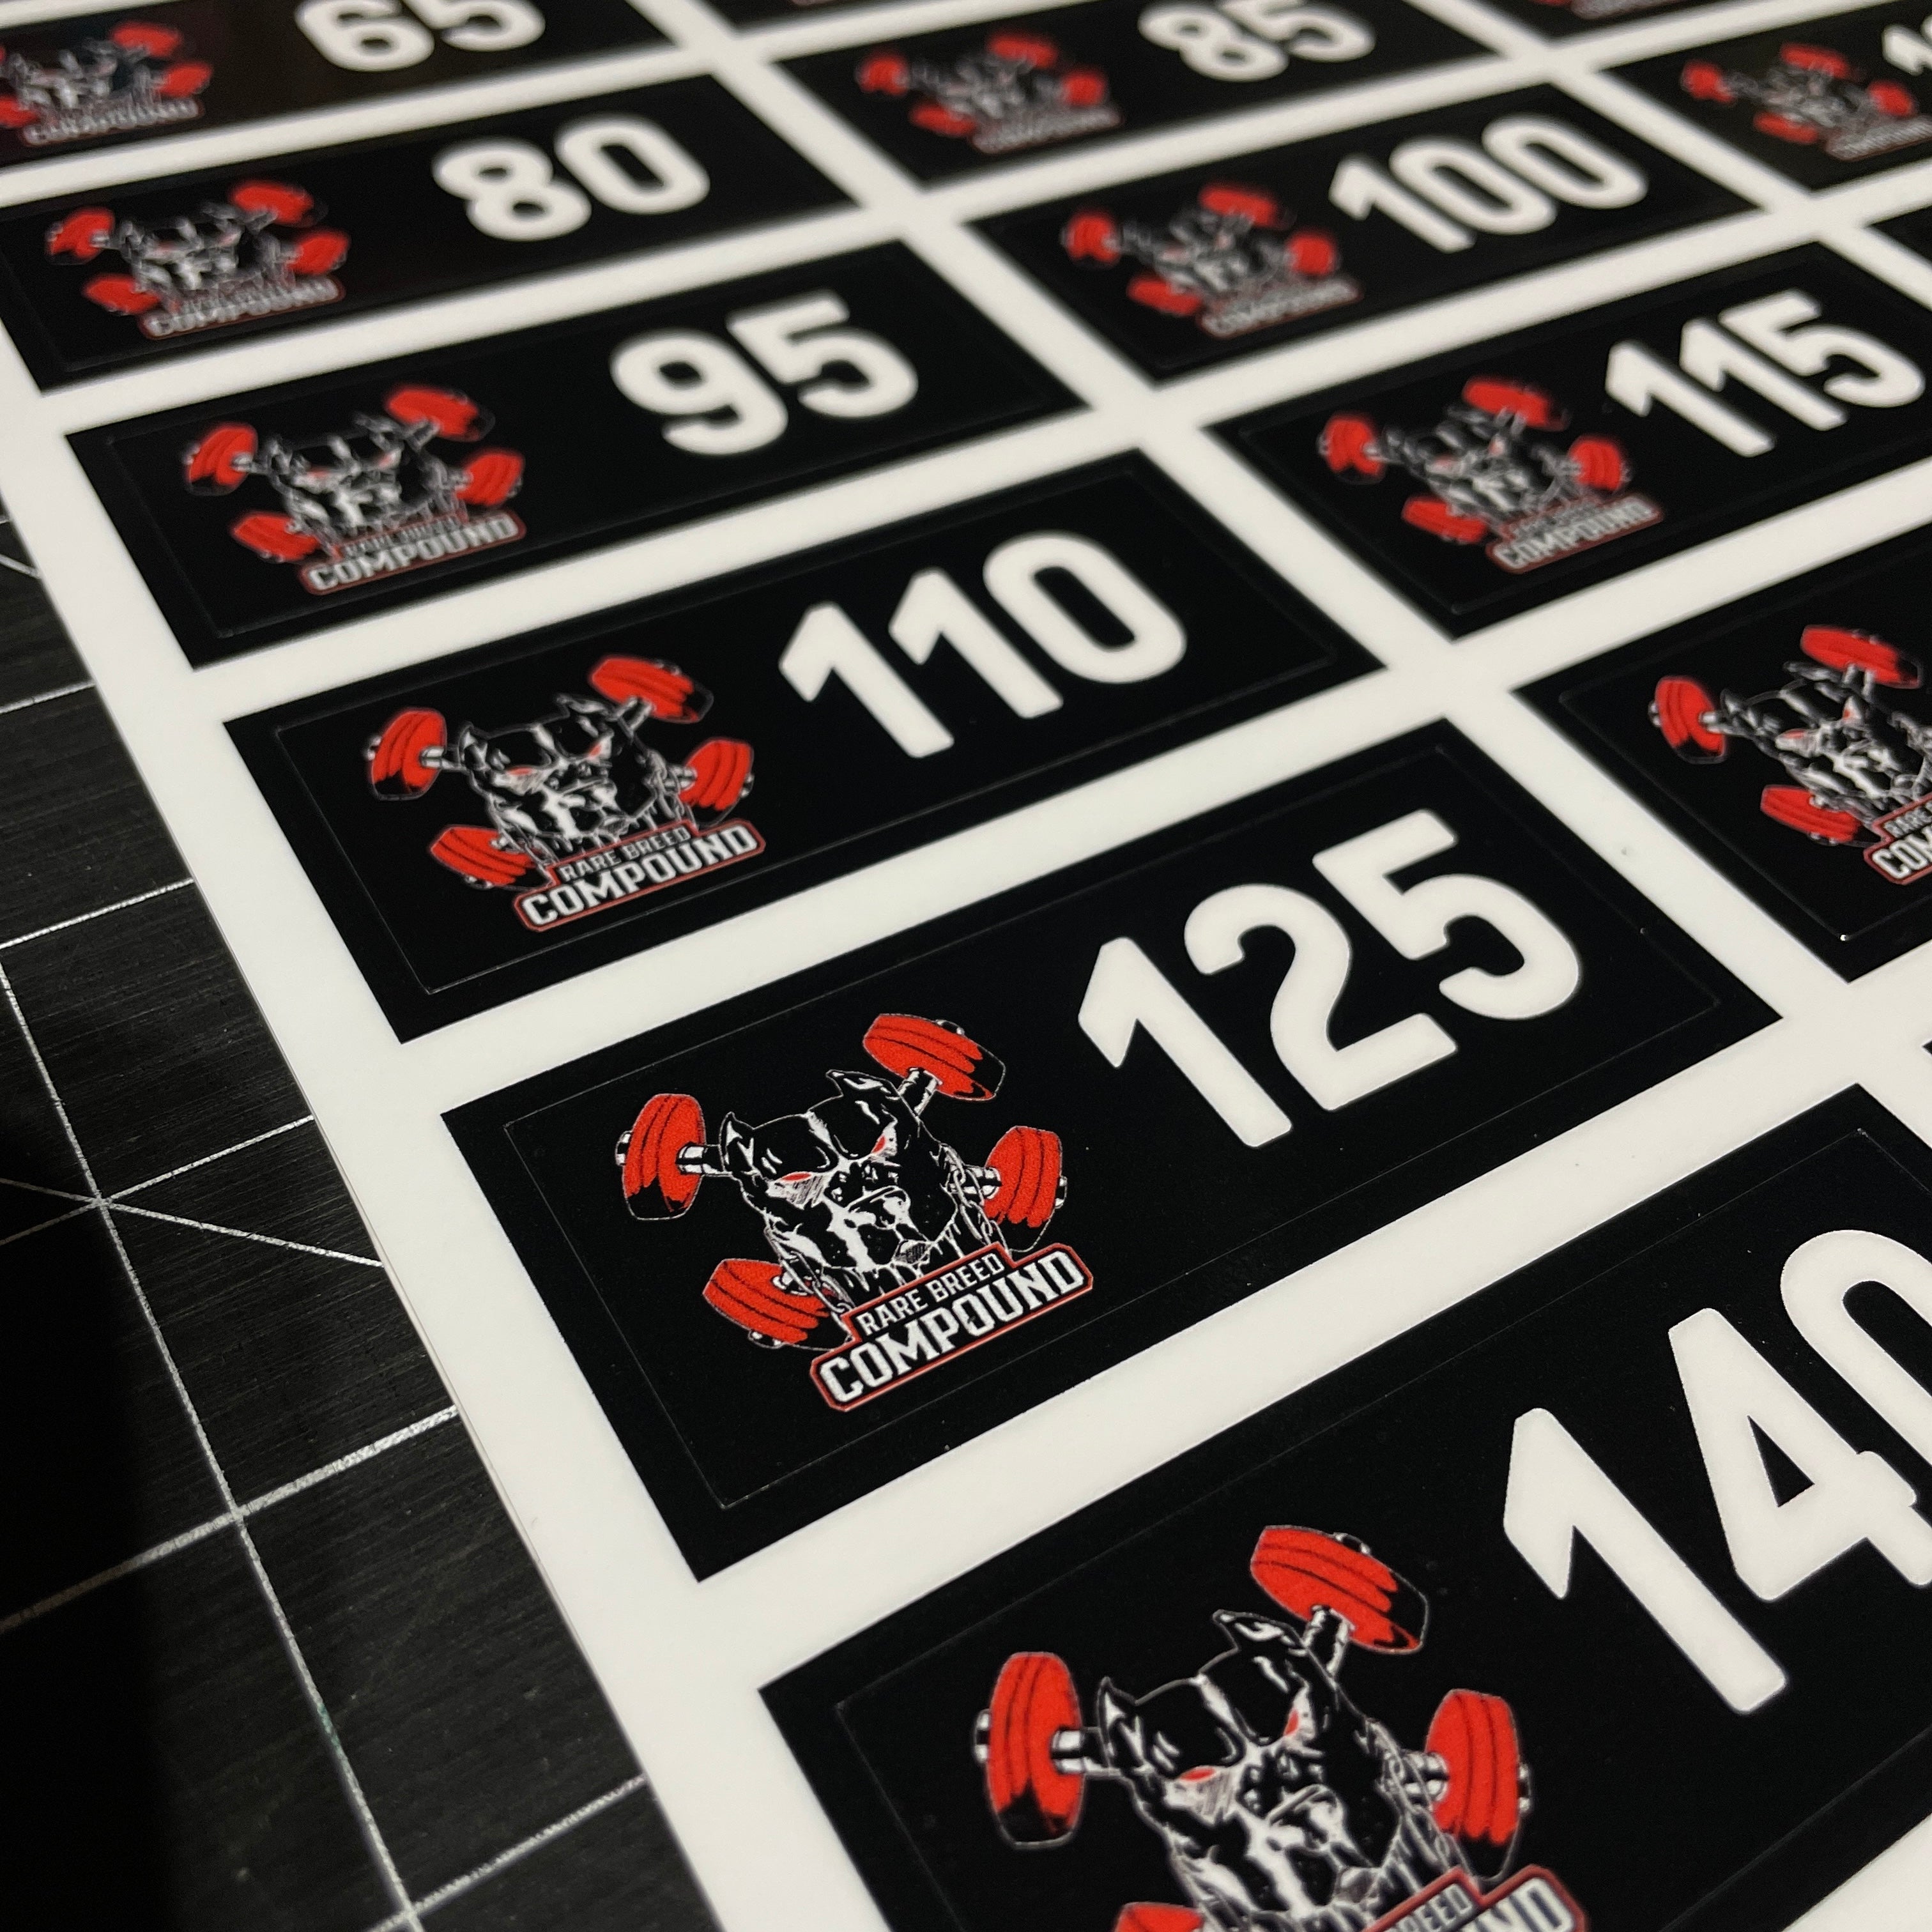 Dumbell Rack Number Stickers